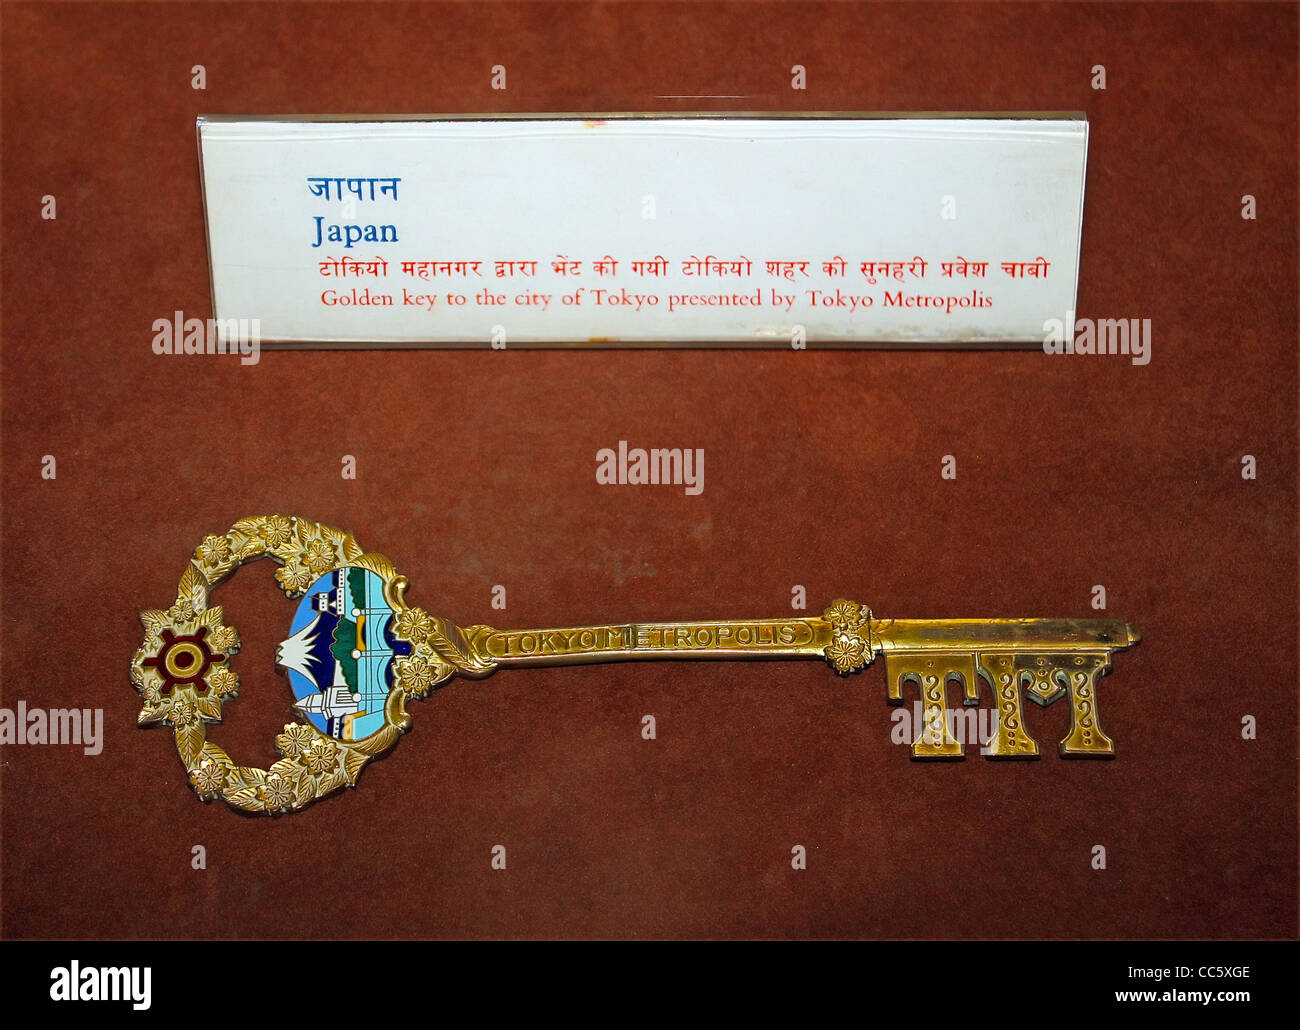 Golden key to the City of tokyo presented by Tokyo metropolis kept at National museum , India Stock Photo